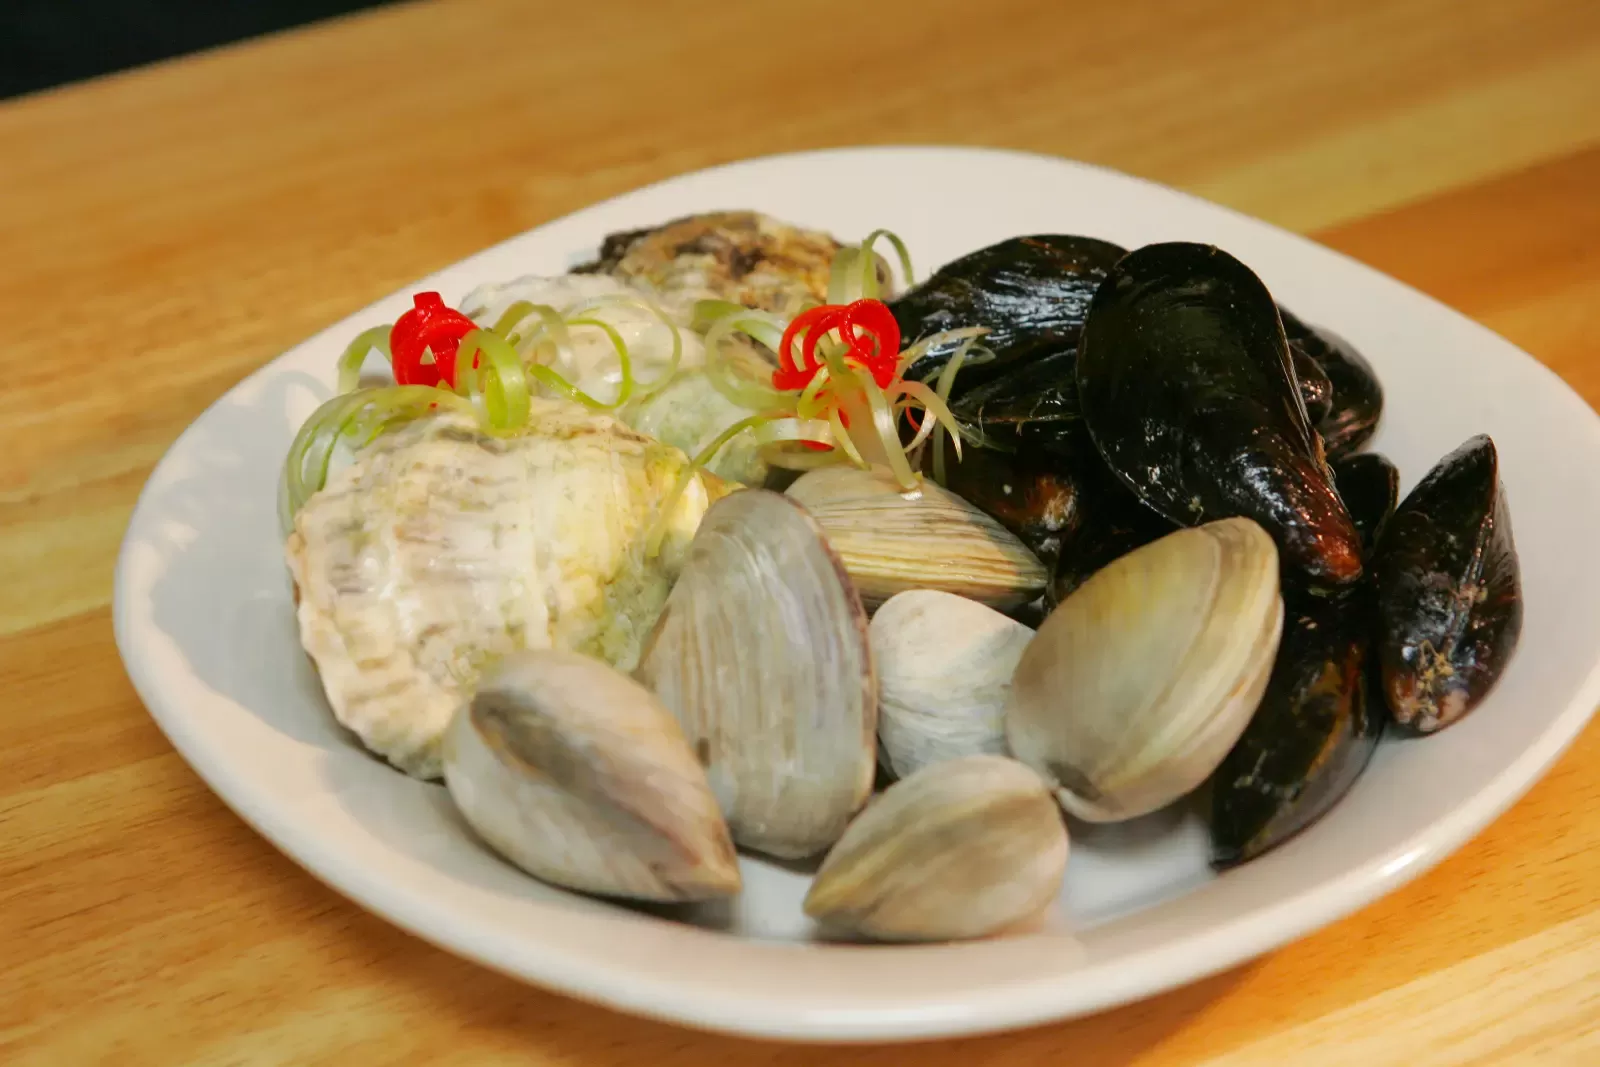 Plate of Clams and Mussels